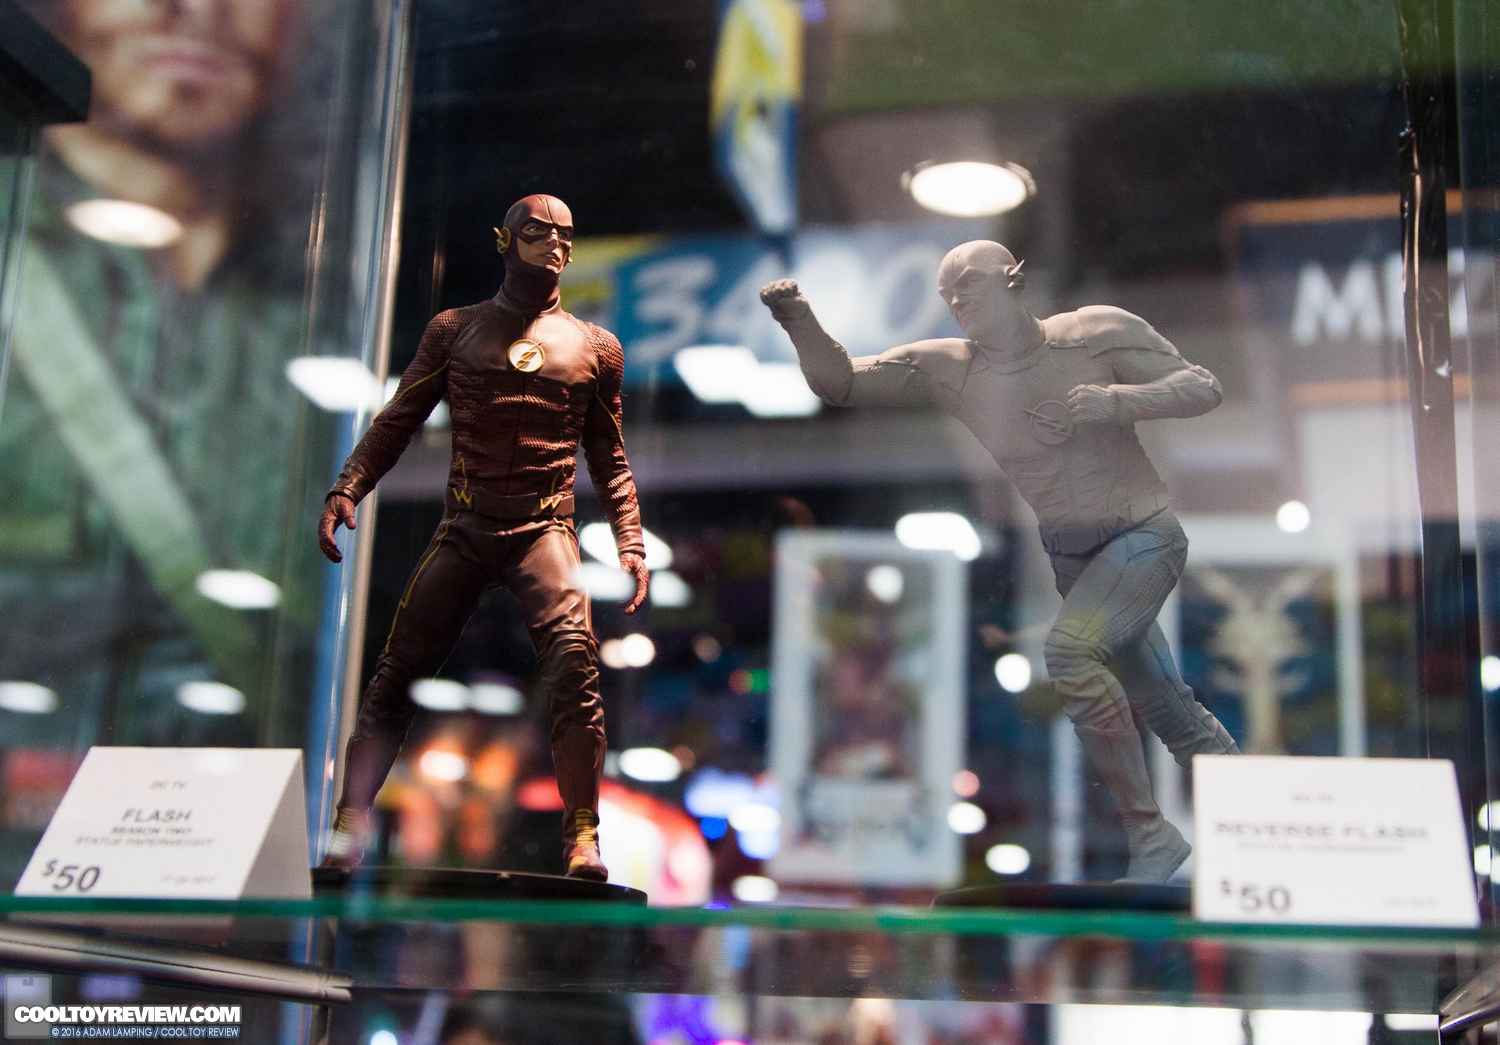 san-diego-comic-con-icon-heroes-booth-036.jpg